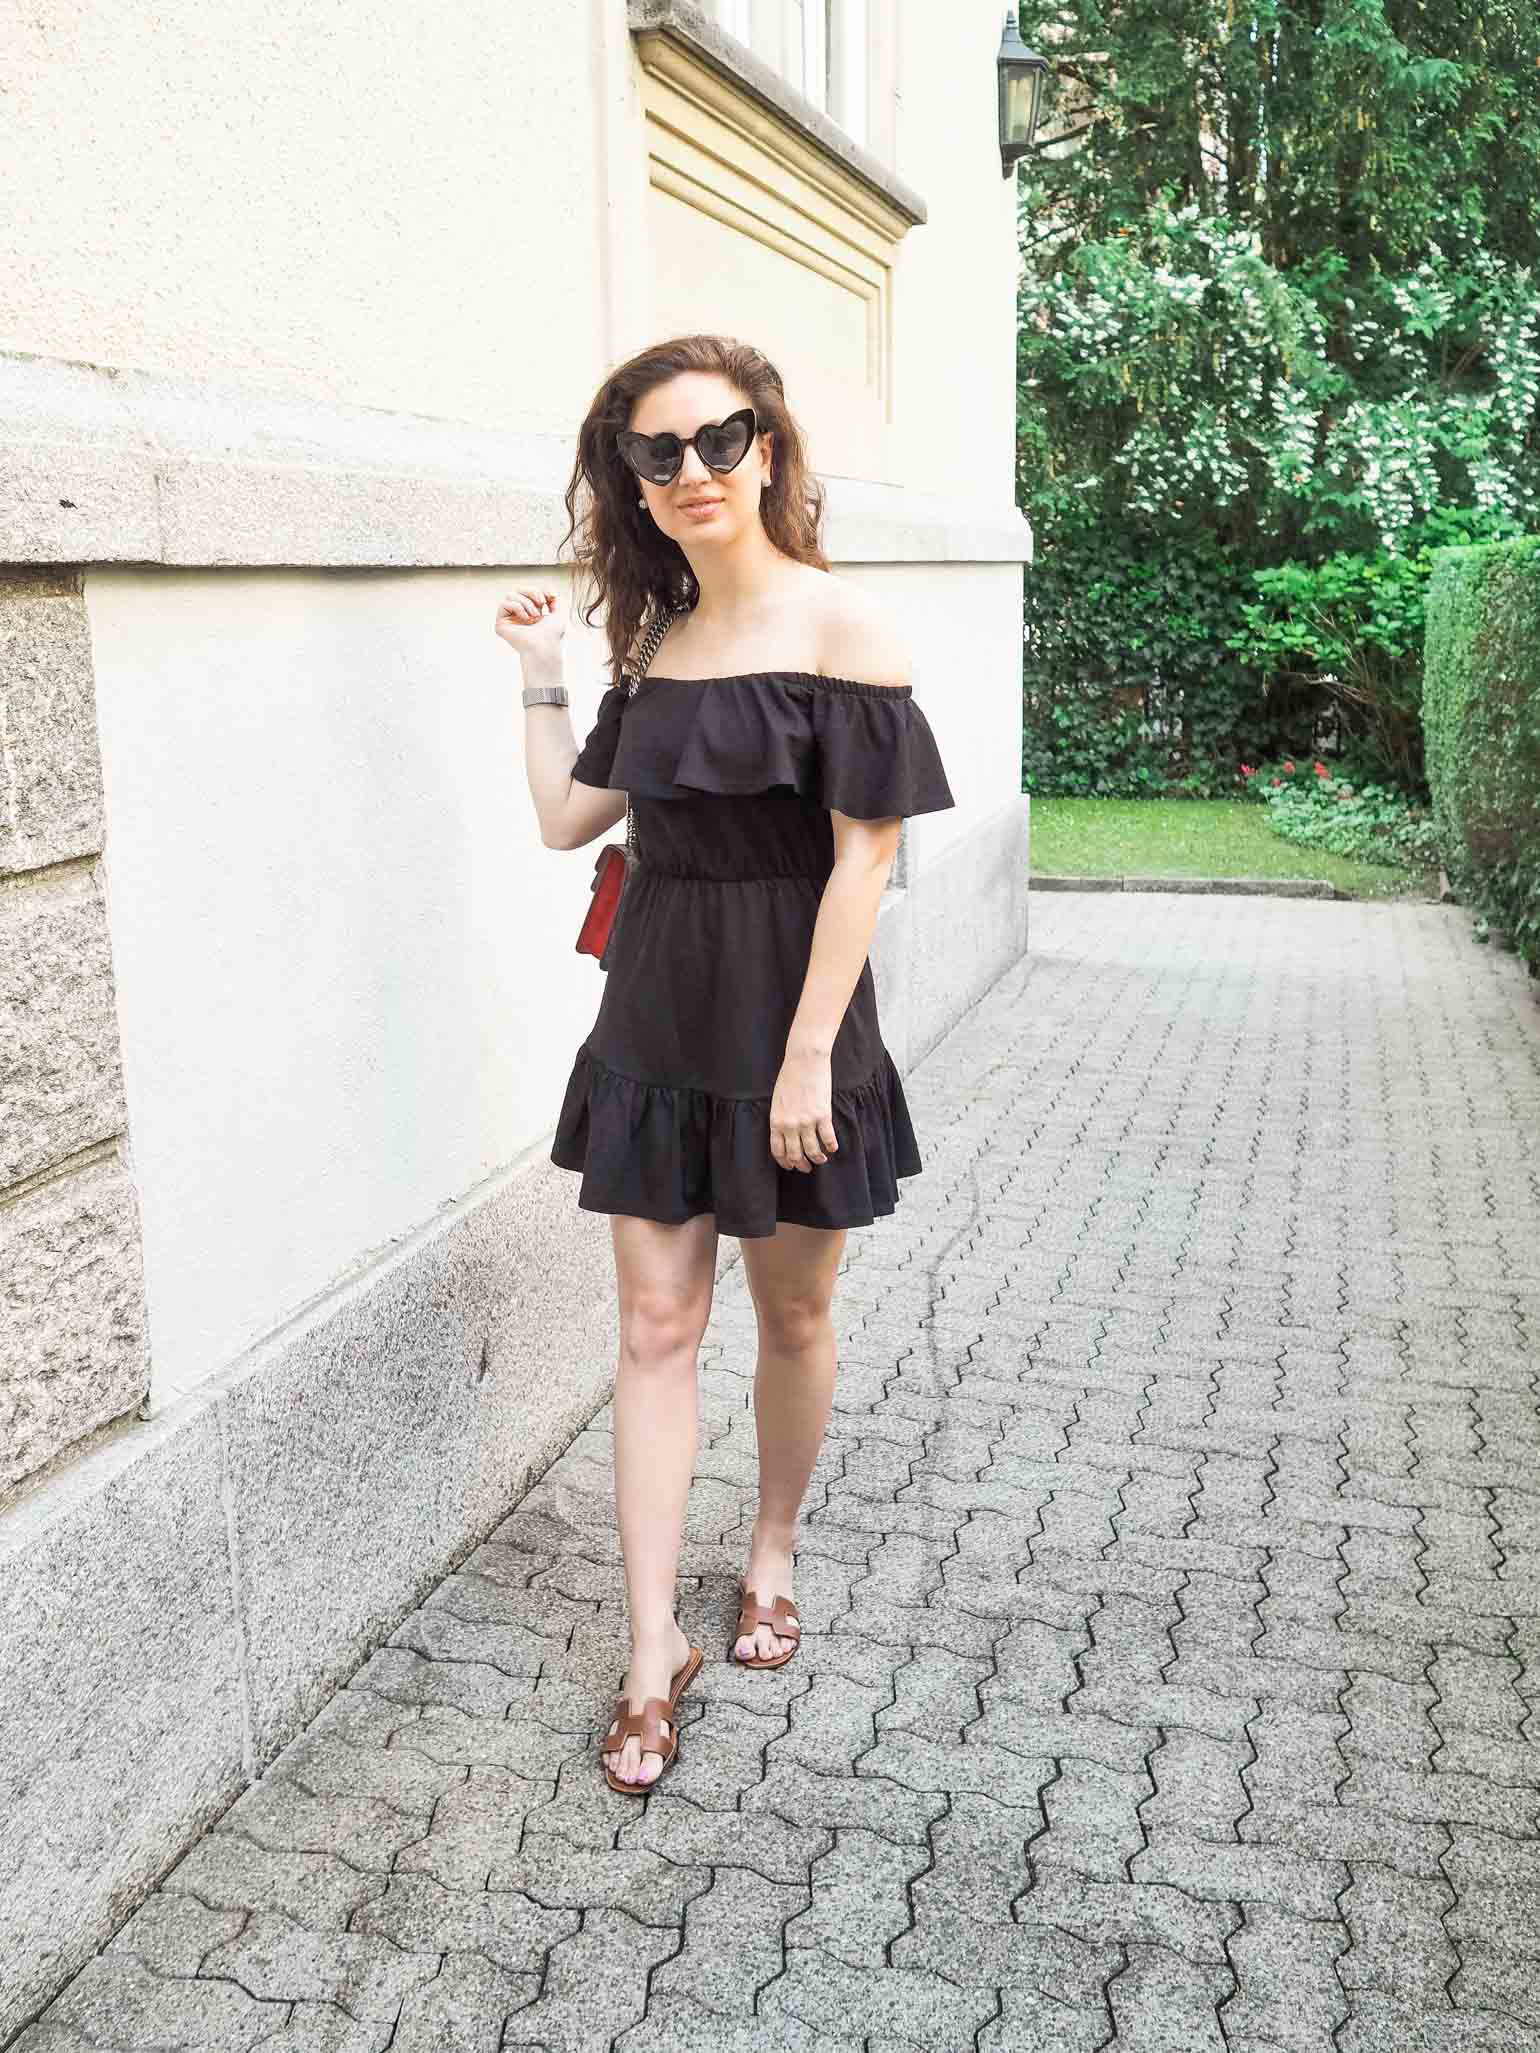 How to Wear Sneakers with A Dress: Dress It Down - The Brunette Nomad